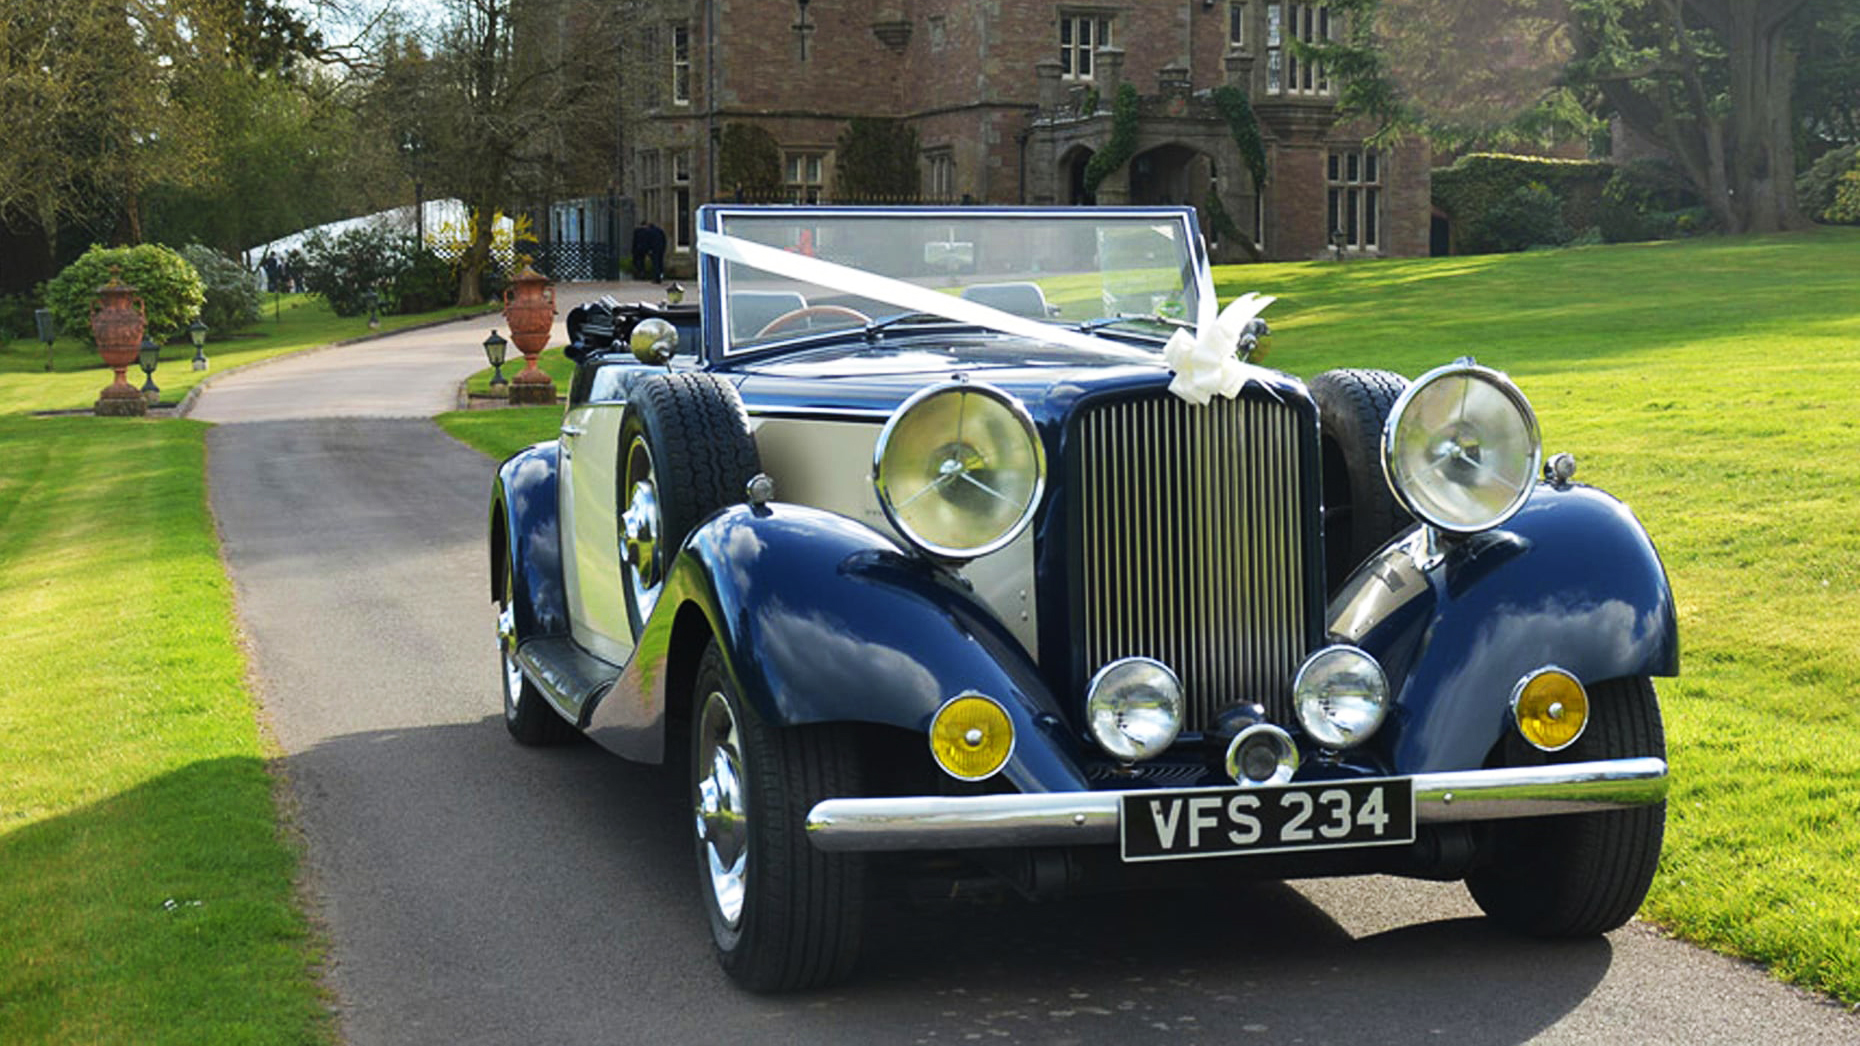 Blue and Ivory vintage Jaguar Drophead on the driveway of a local wedding venue inAshby-de-la-Zouch.